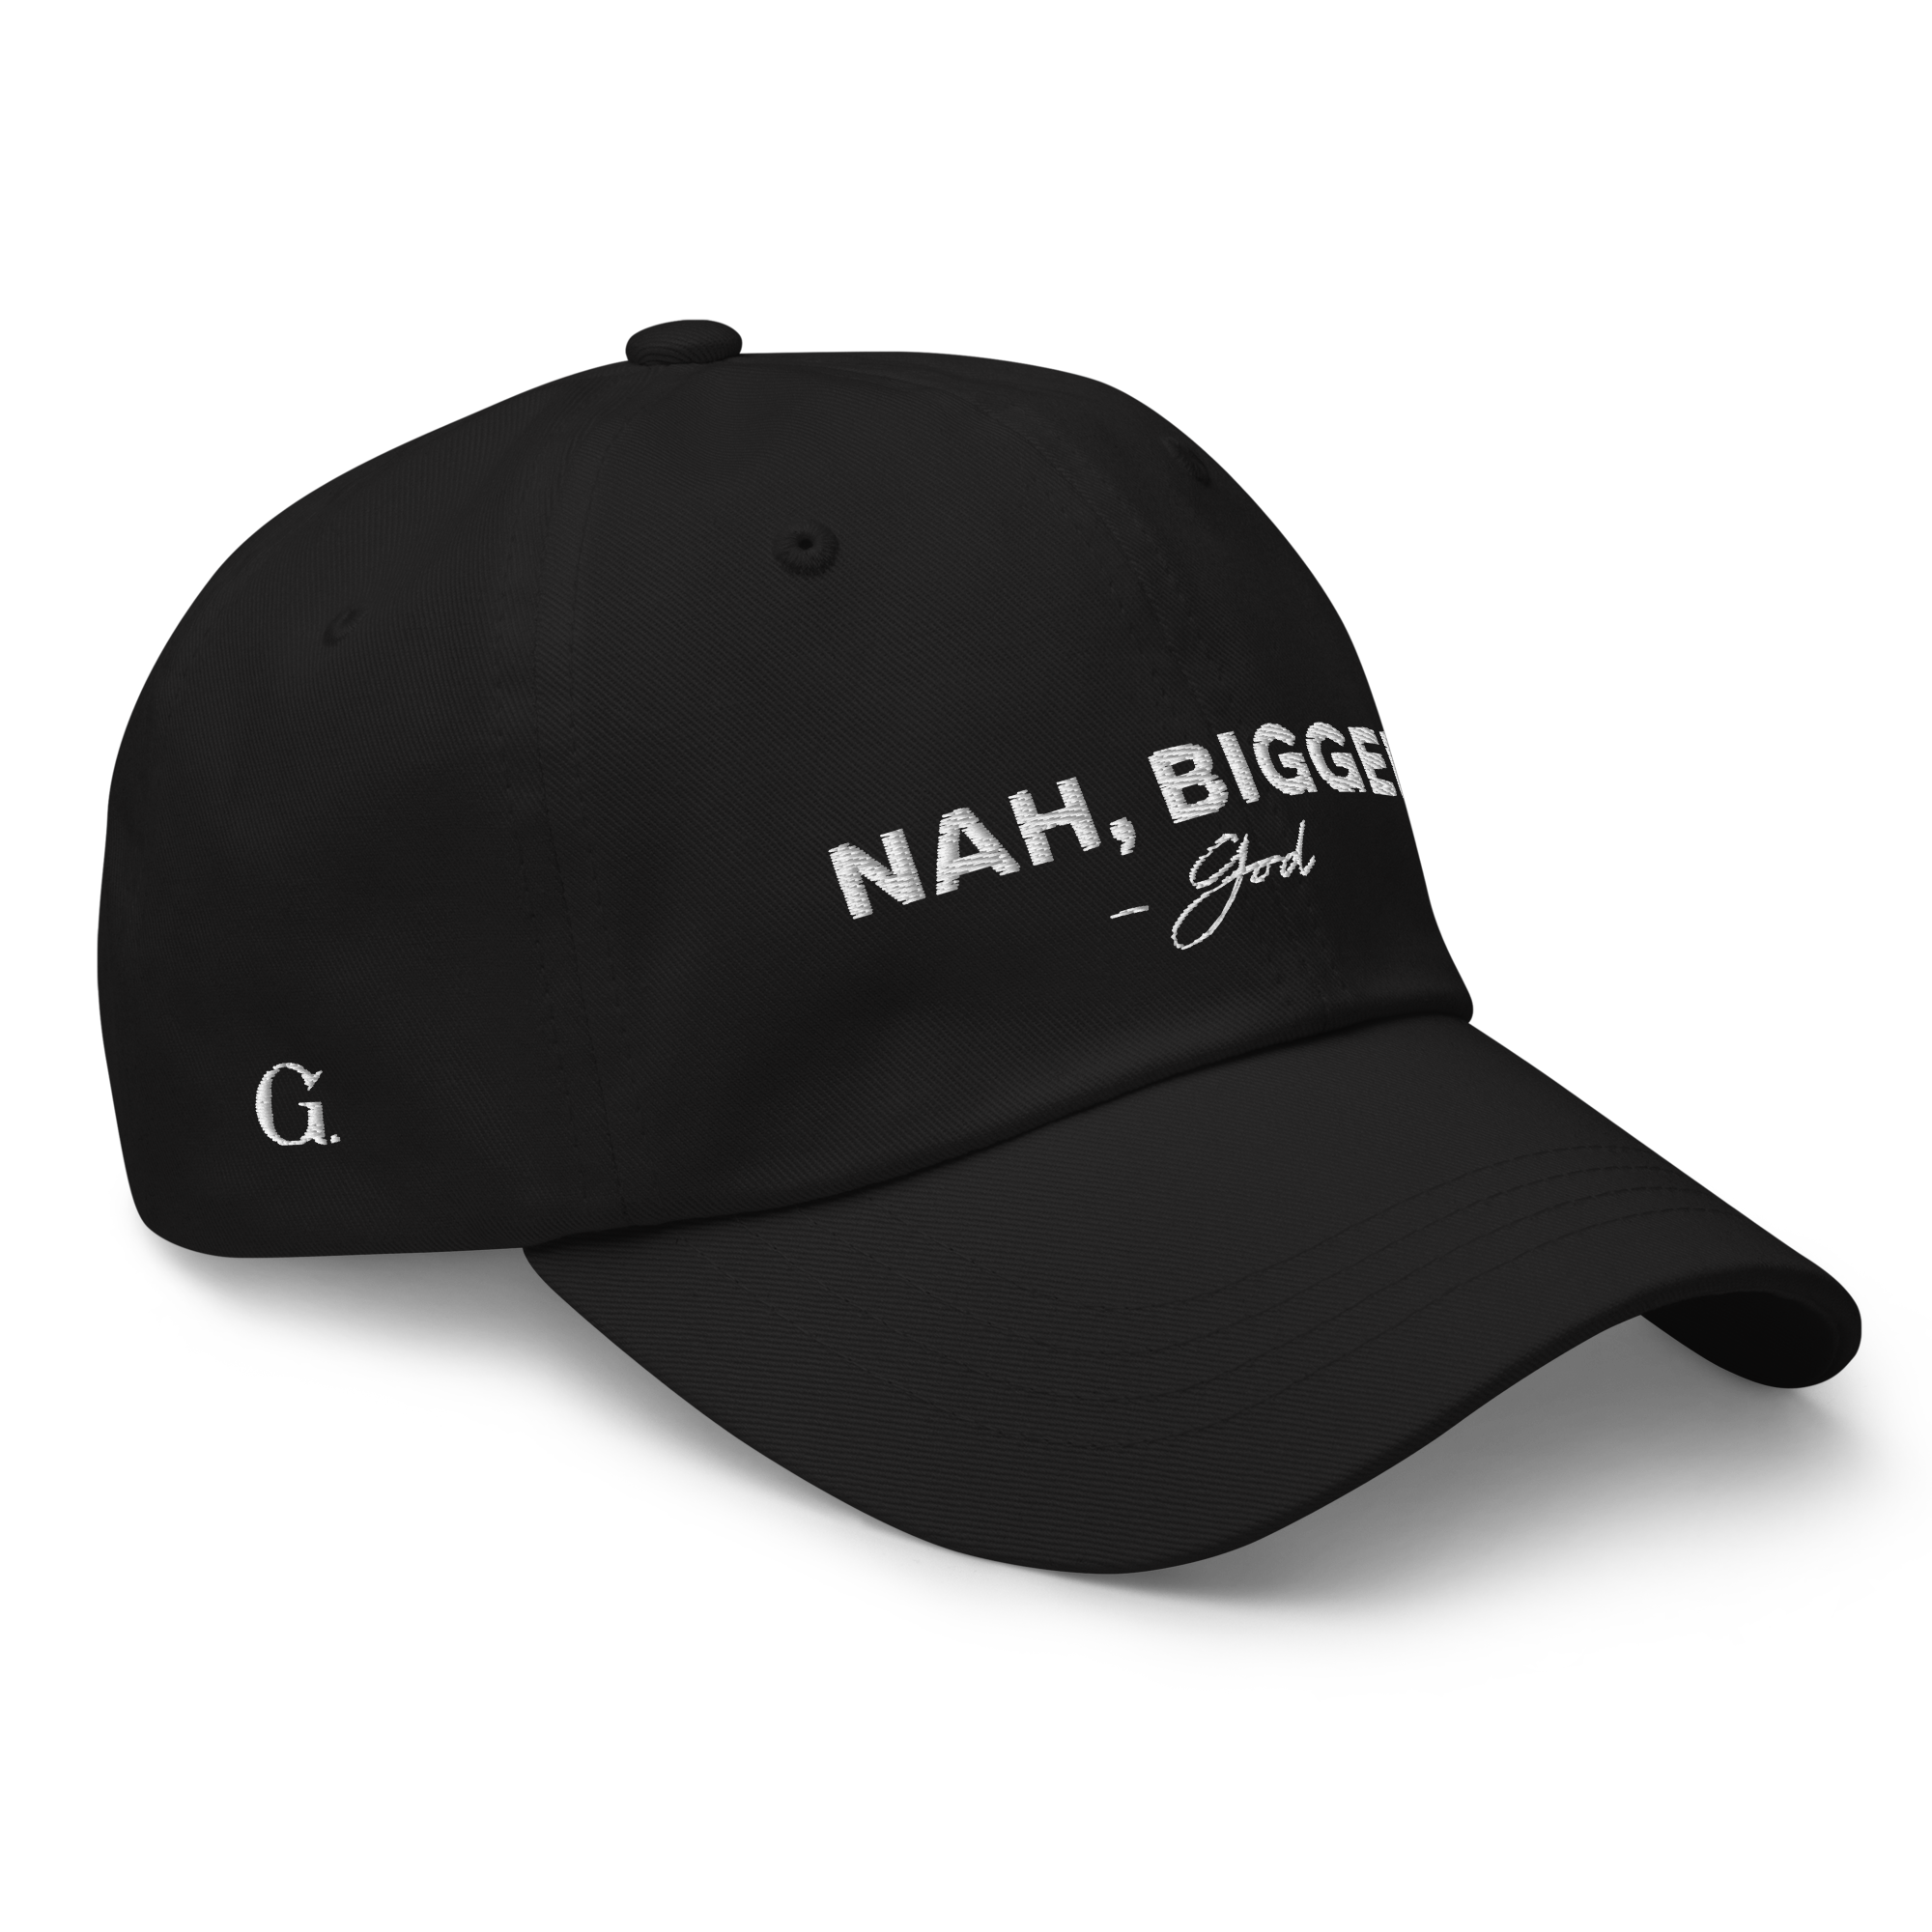 Nah, Bigger Classic Dad Hat Right Side